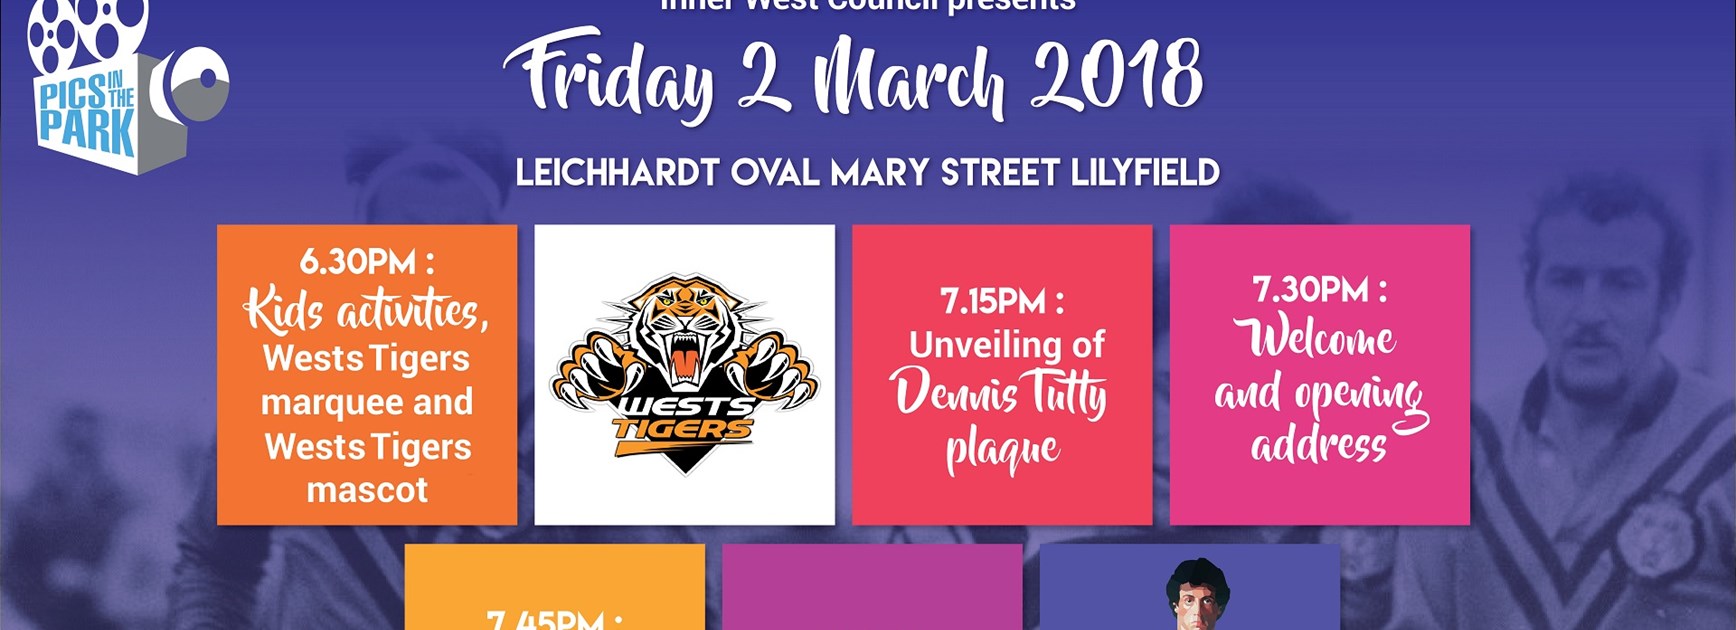 Family movie night at Leichhardt Oval this Friday